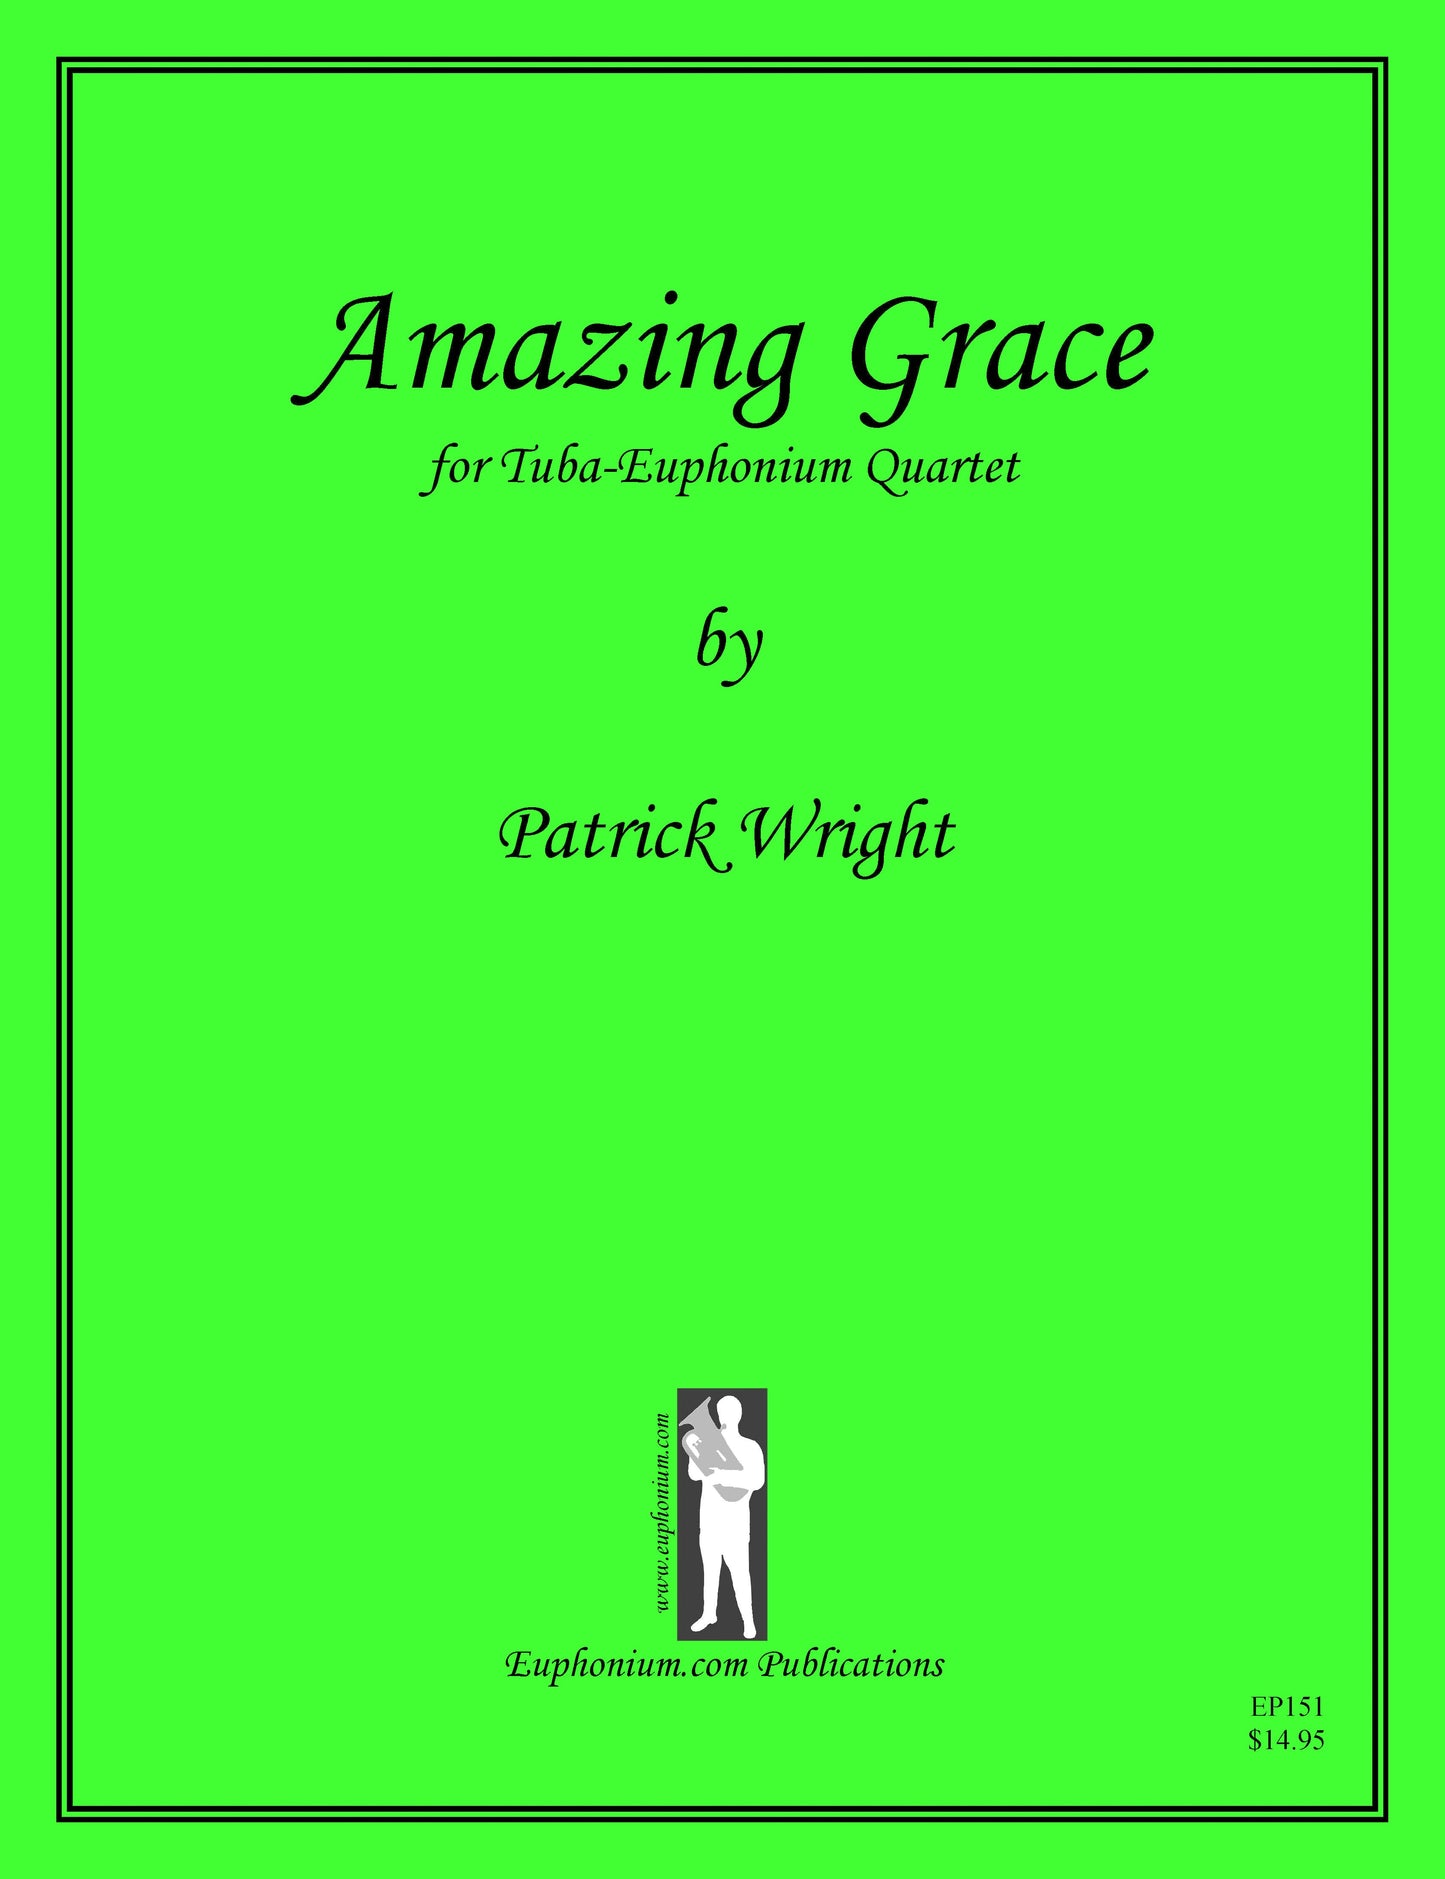 Wright - Amazing Grace DOWNLOAD